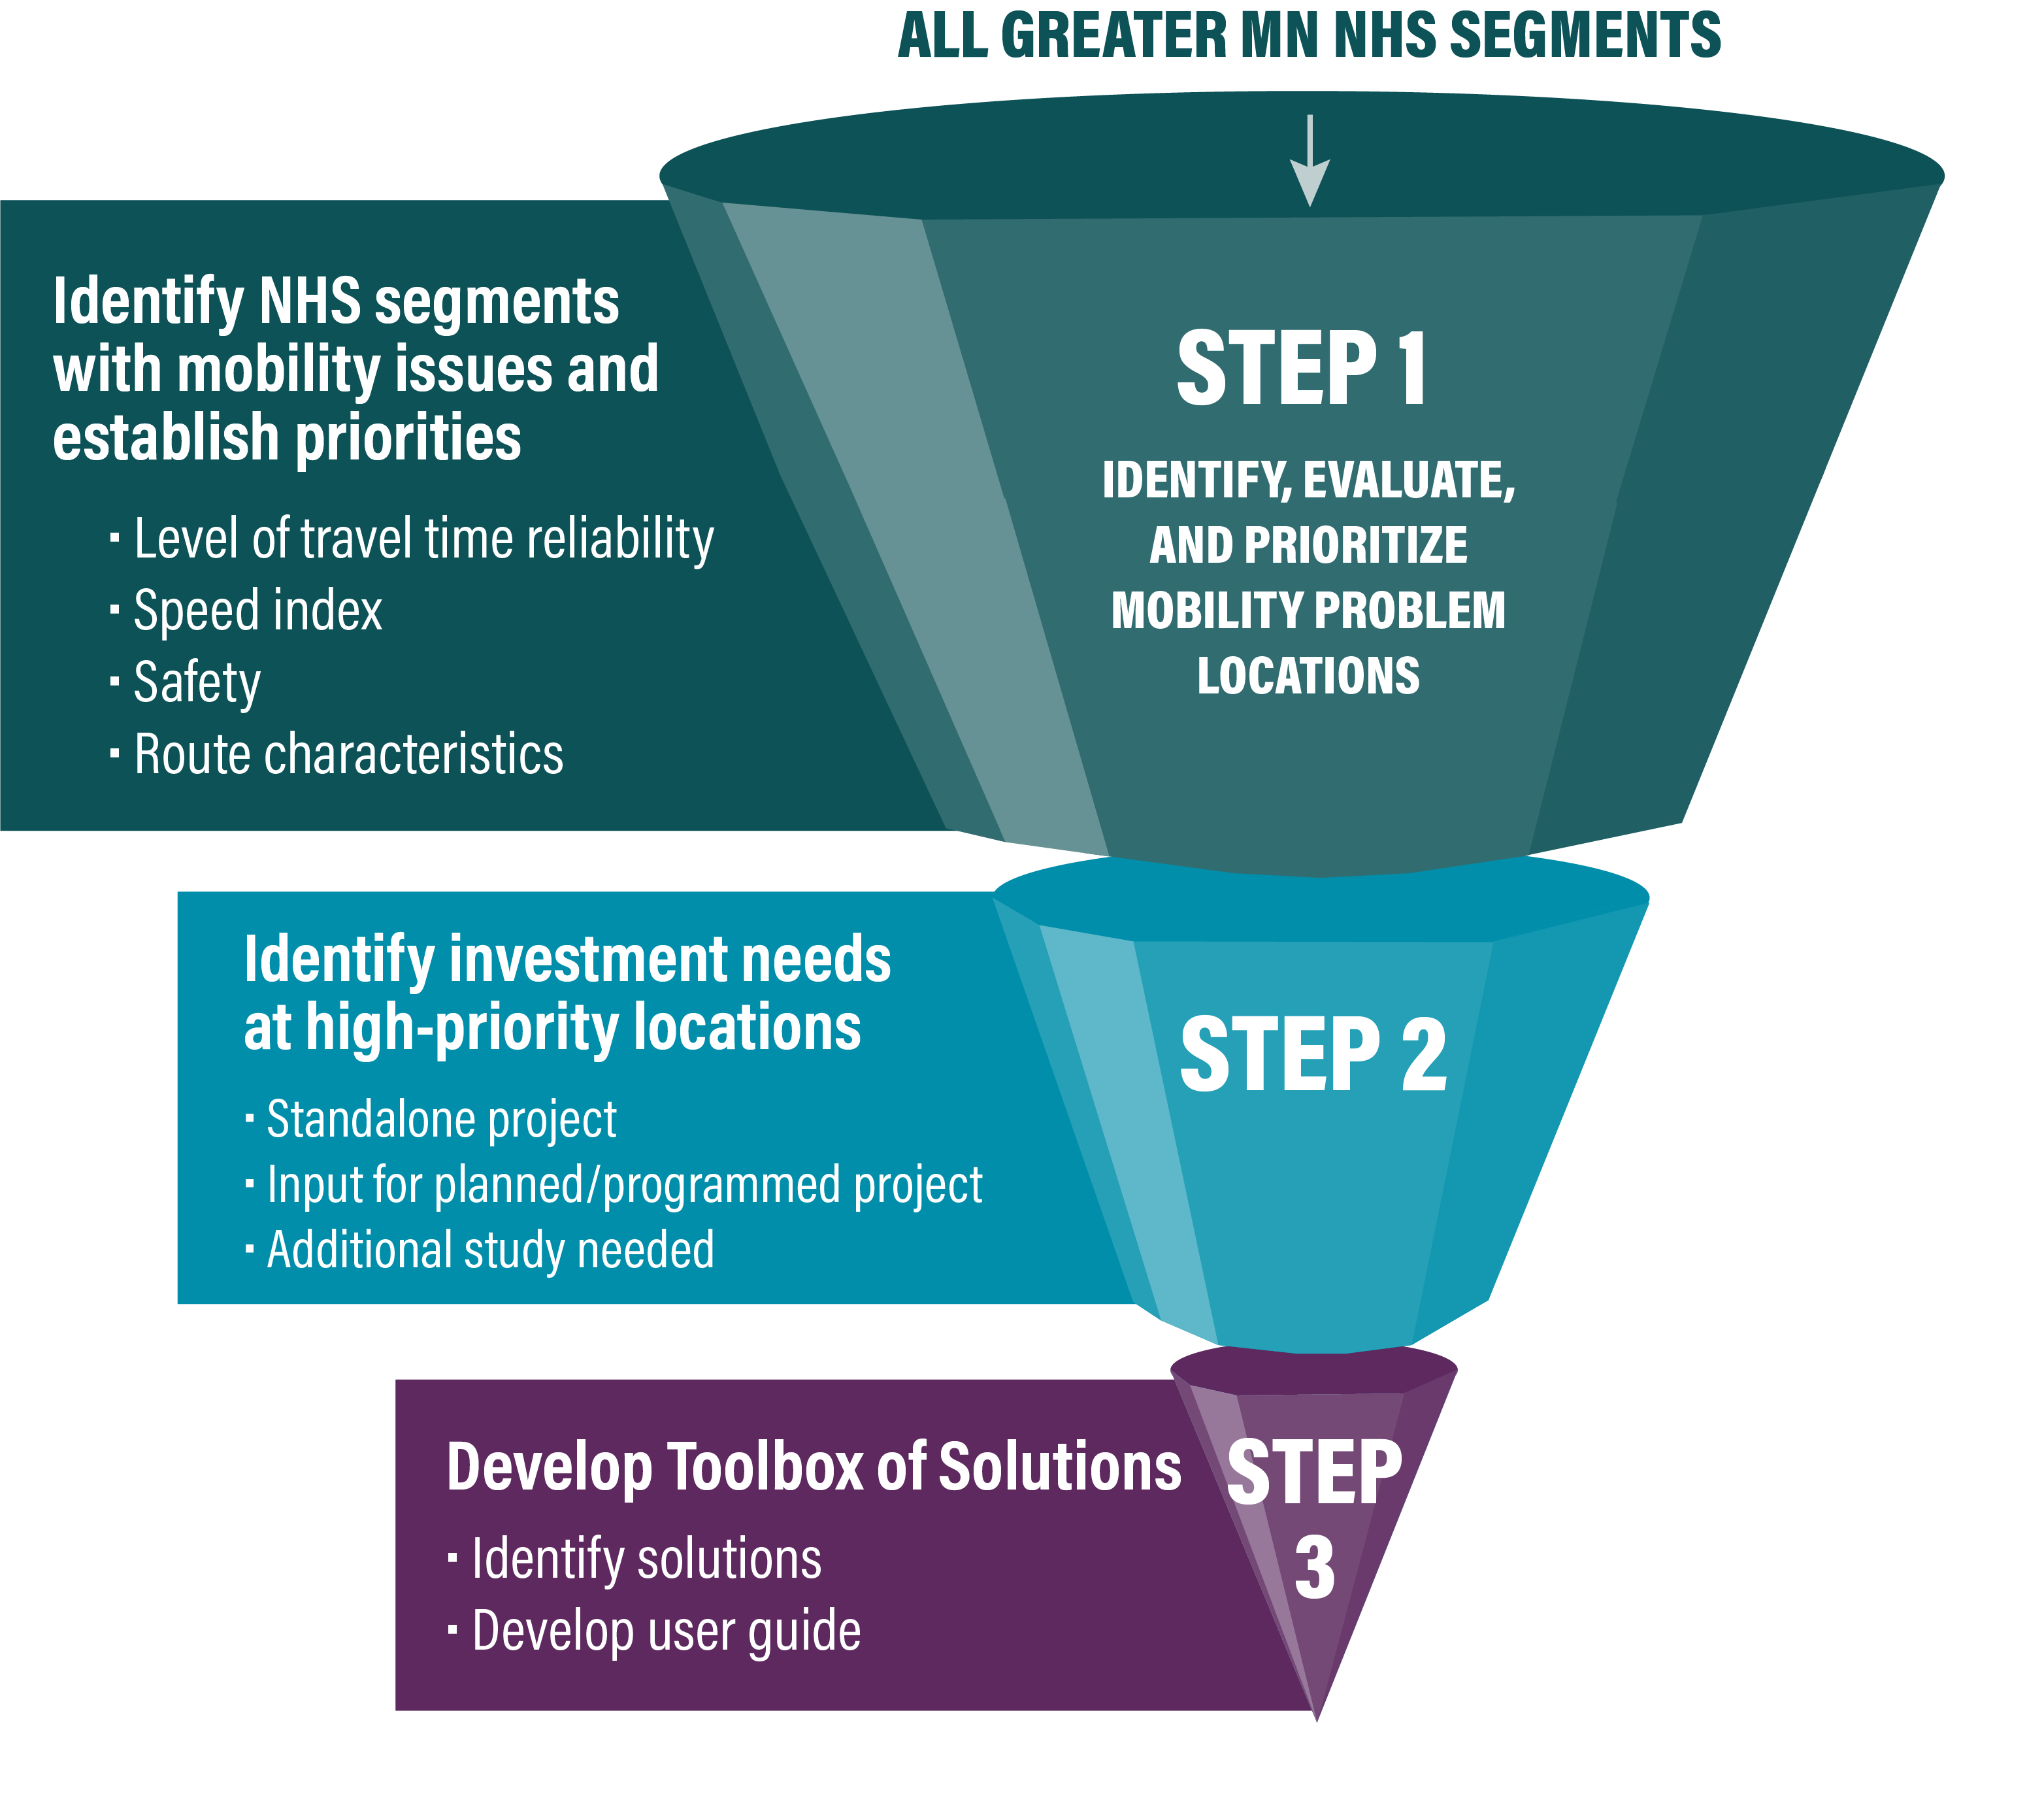 Graphic of three funnels. The largest funnel, on the top, represents identifying and evaluating mobility problem locations. The second, smaller funner, underneath the first, represents identifying investment needs at high-priority locations. Finally, the third and smallest funnel represents developing a toolbox of solutions.